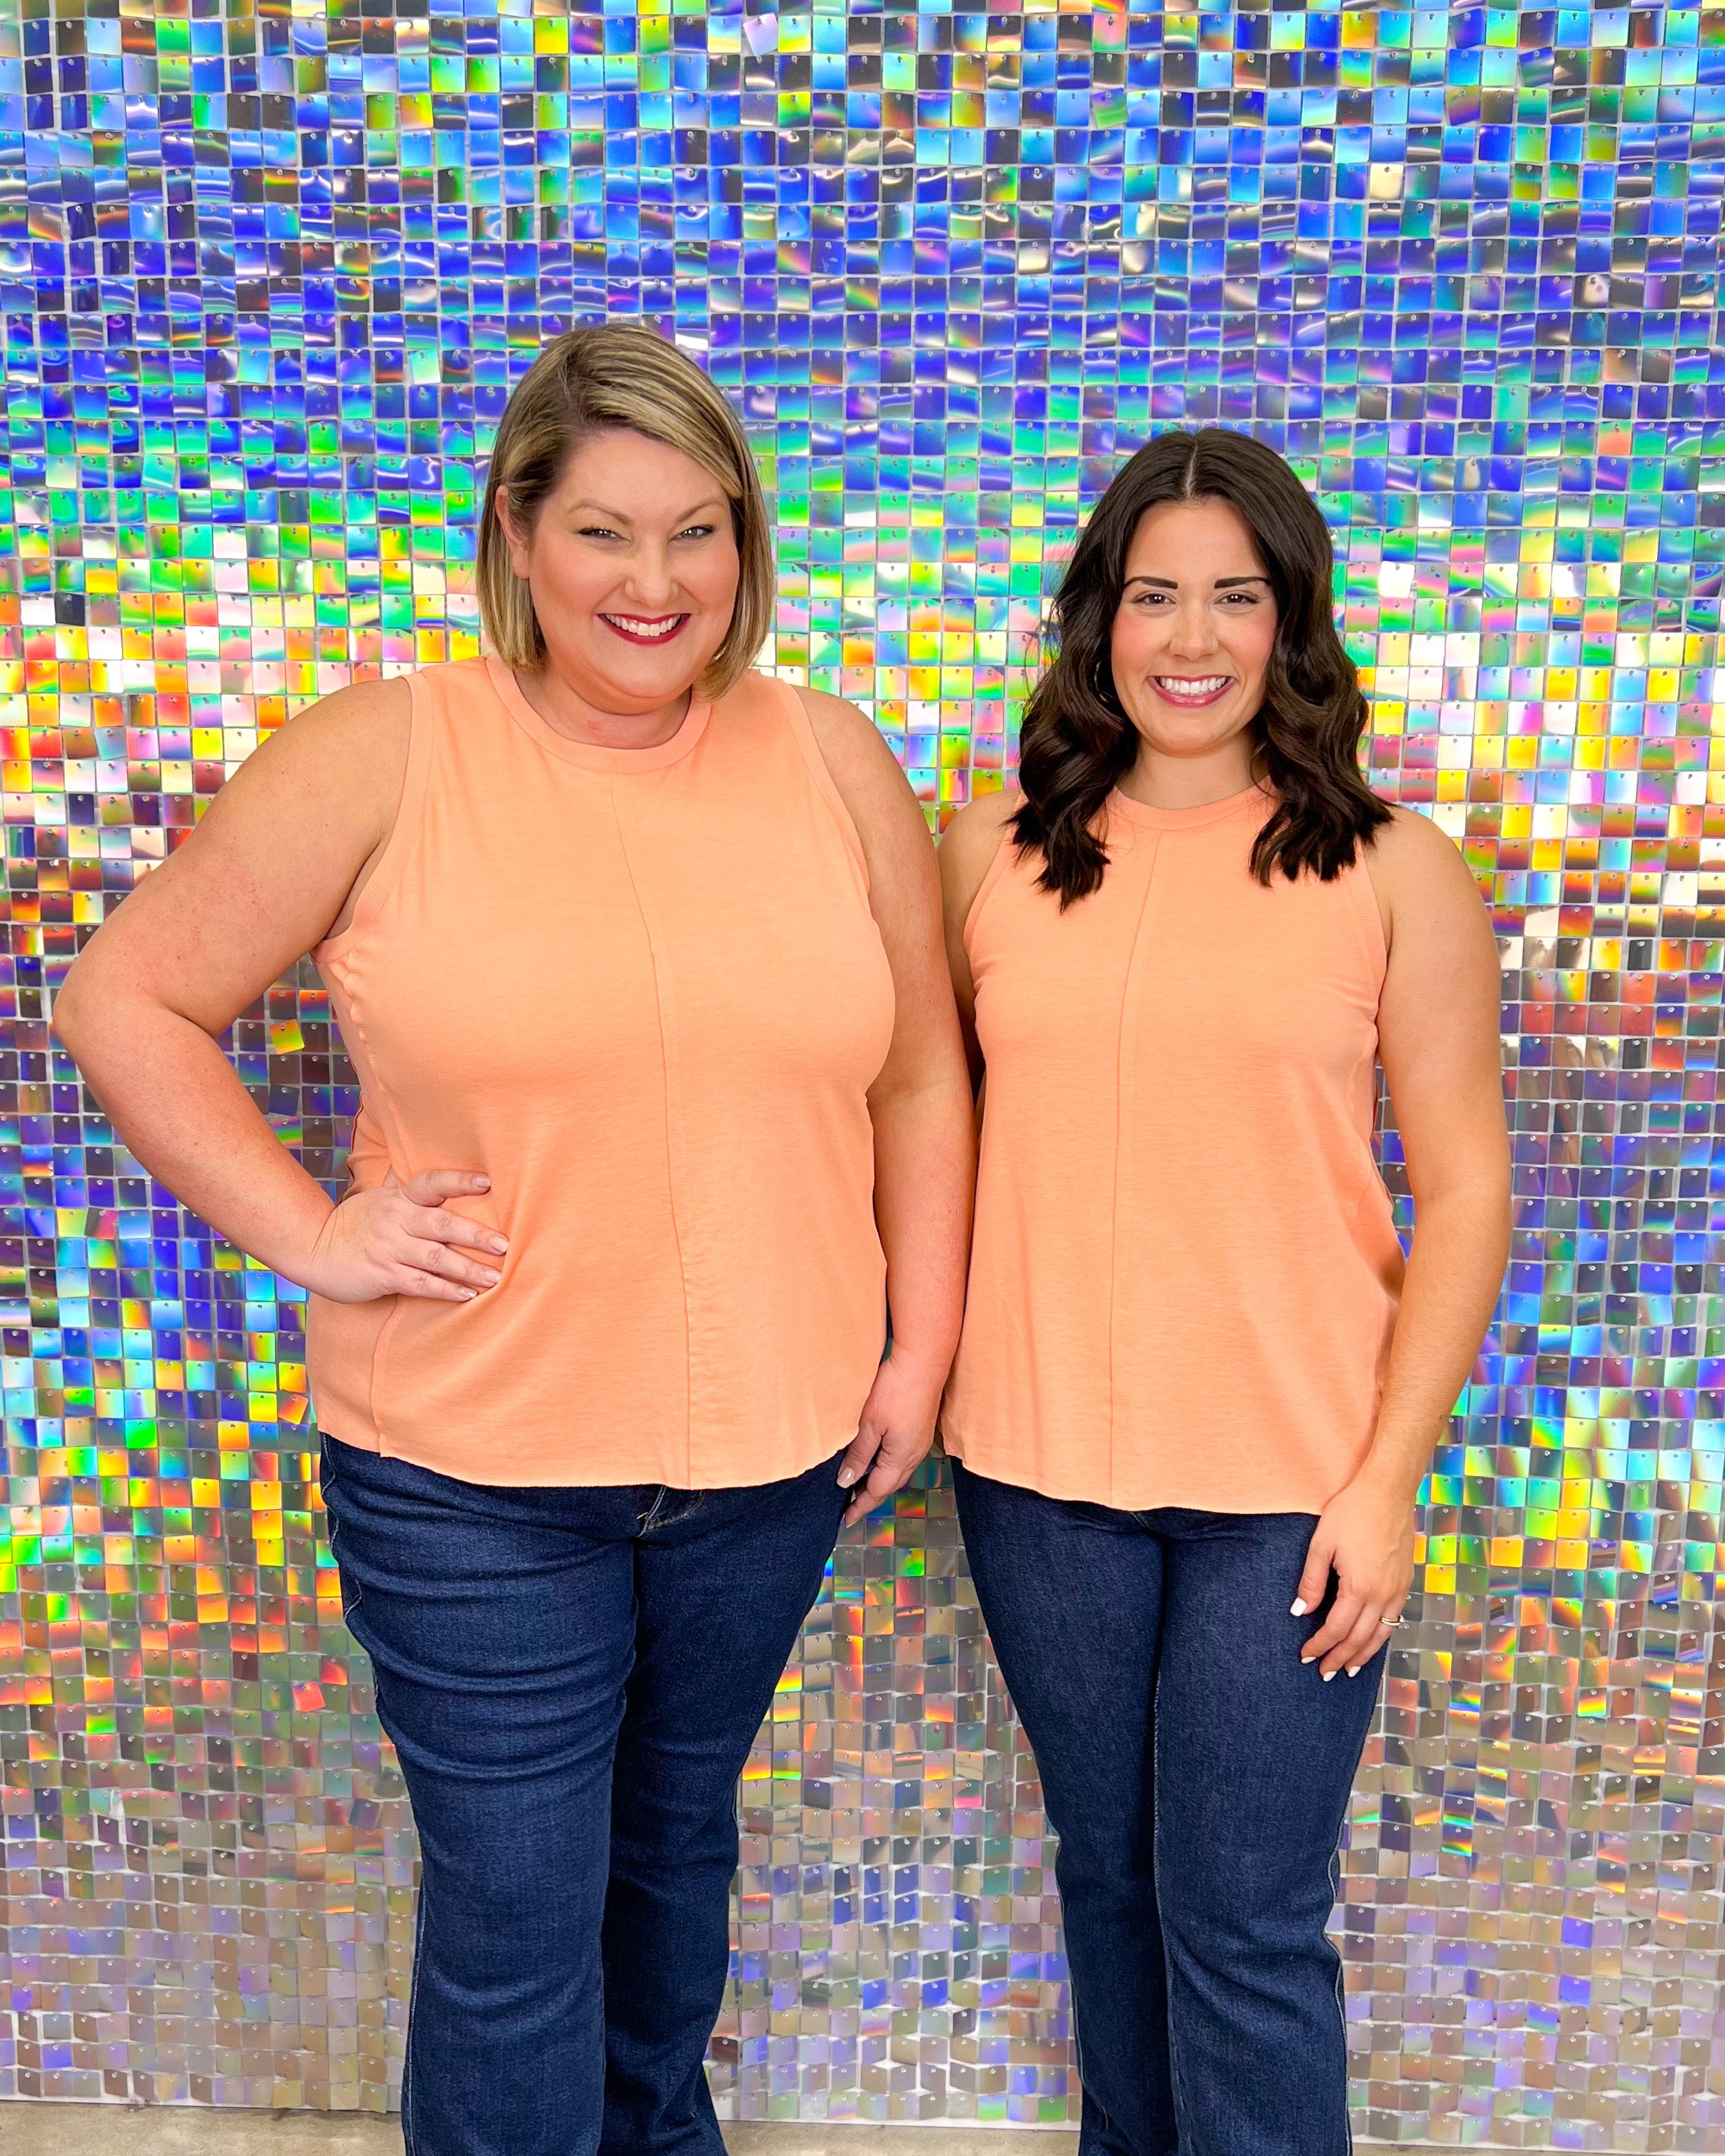 Mud Pie Dempsey Swing Tank - Peach, sleeveless, exposed center seam, ribbed panels at side, plus size